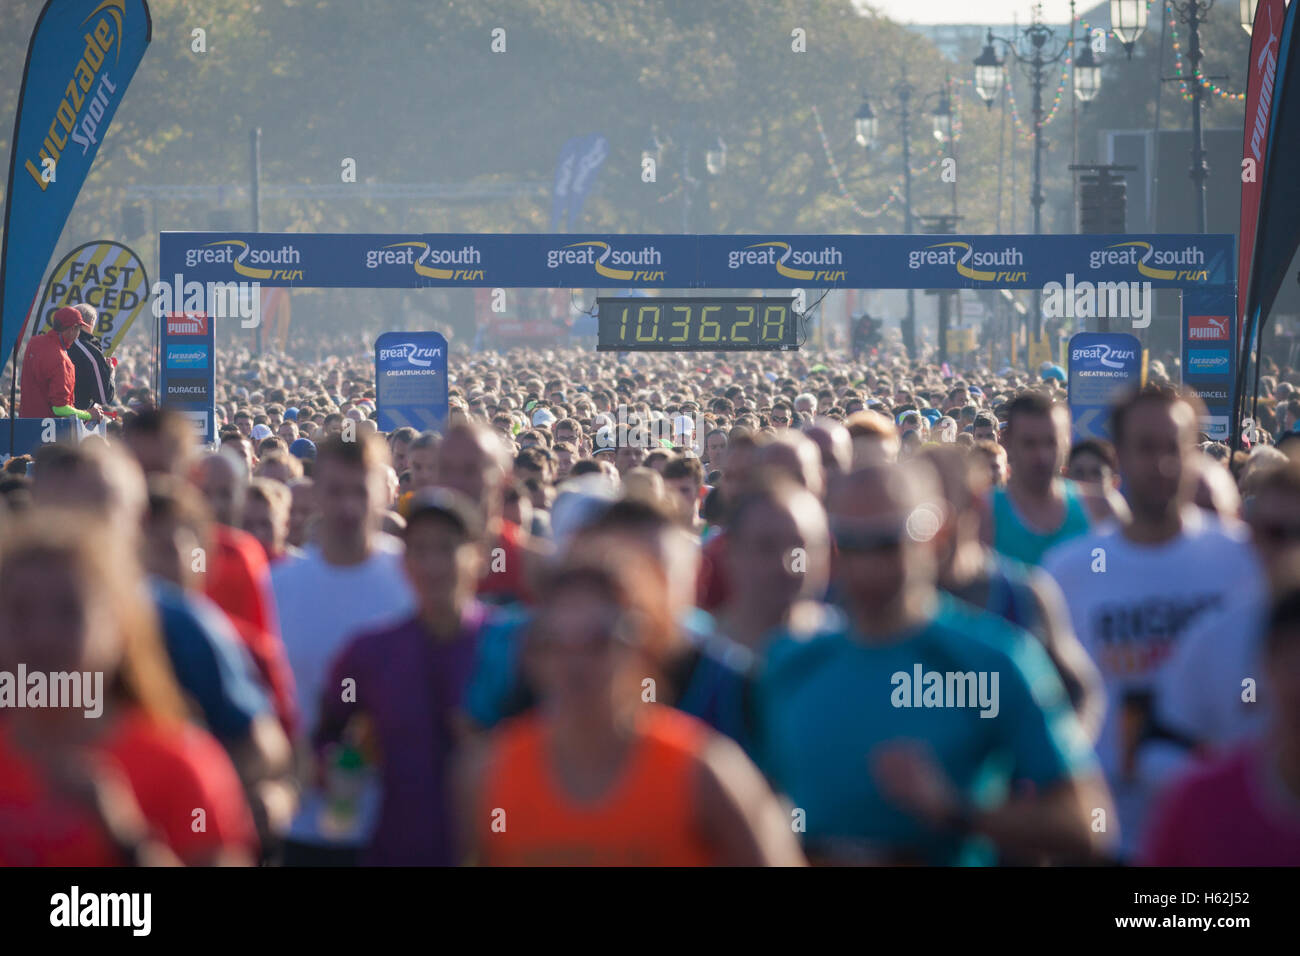 Portsmouth, UK. 23rd October, 2016.  Thousands of runners are taking part in the 2016 Great South Run in the waterfront city of Portsmouth today, 23rd October 2016. The 10 mile road running event is hailed as the world's greatest 10-mile race by event organisers, and is a fast and flat course that starts and finishes in Southsea. Photo credit: Rob Arnold/Alamy Live News Stock Photo